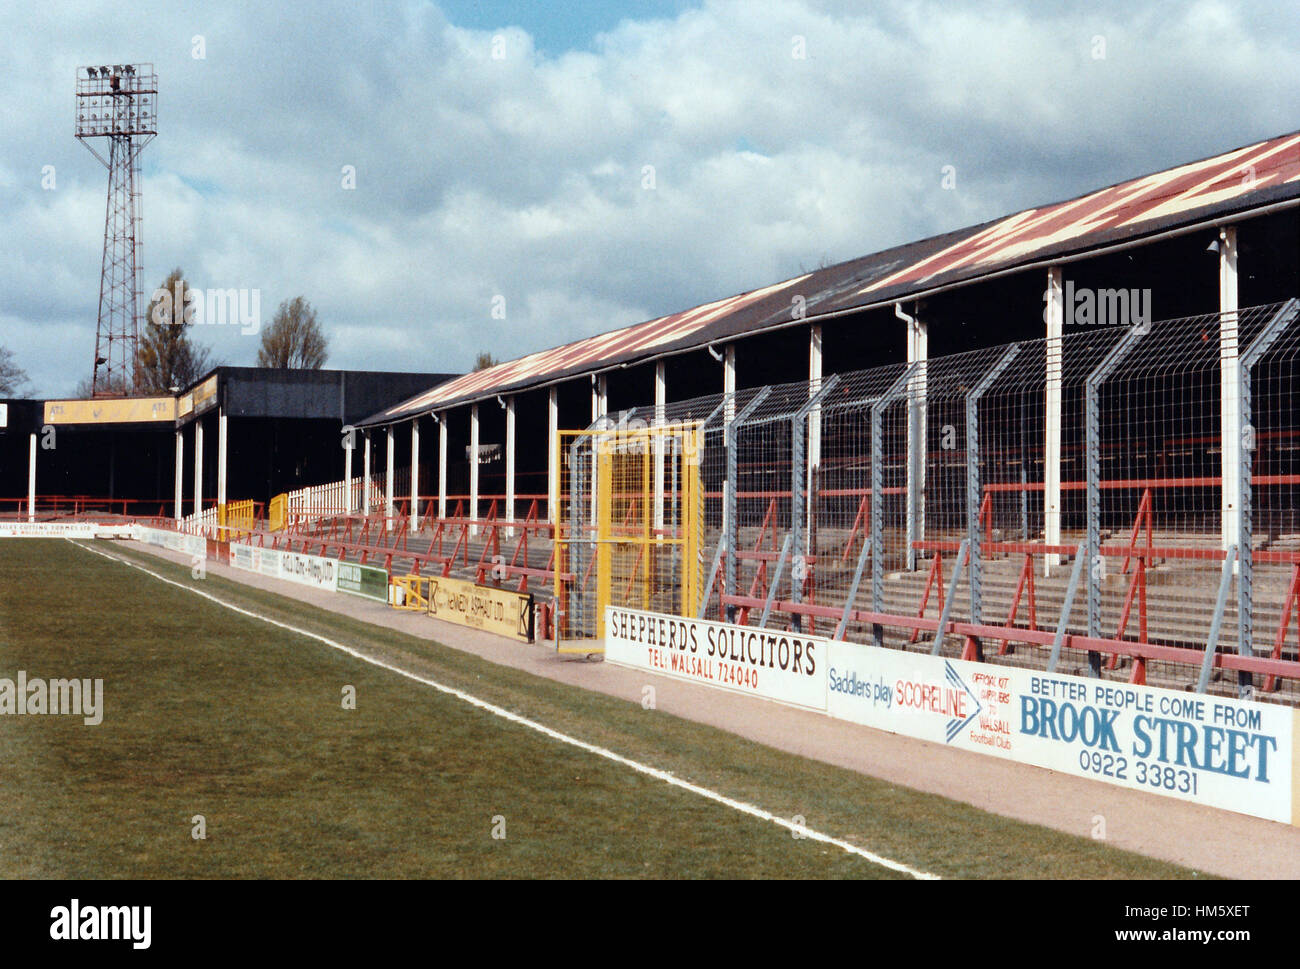 General view of Fellows Park, Walsall Football Club on 4th May 1989 Stock Photo